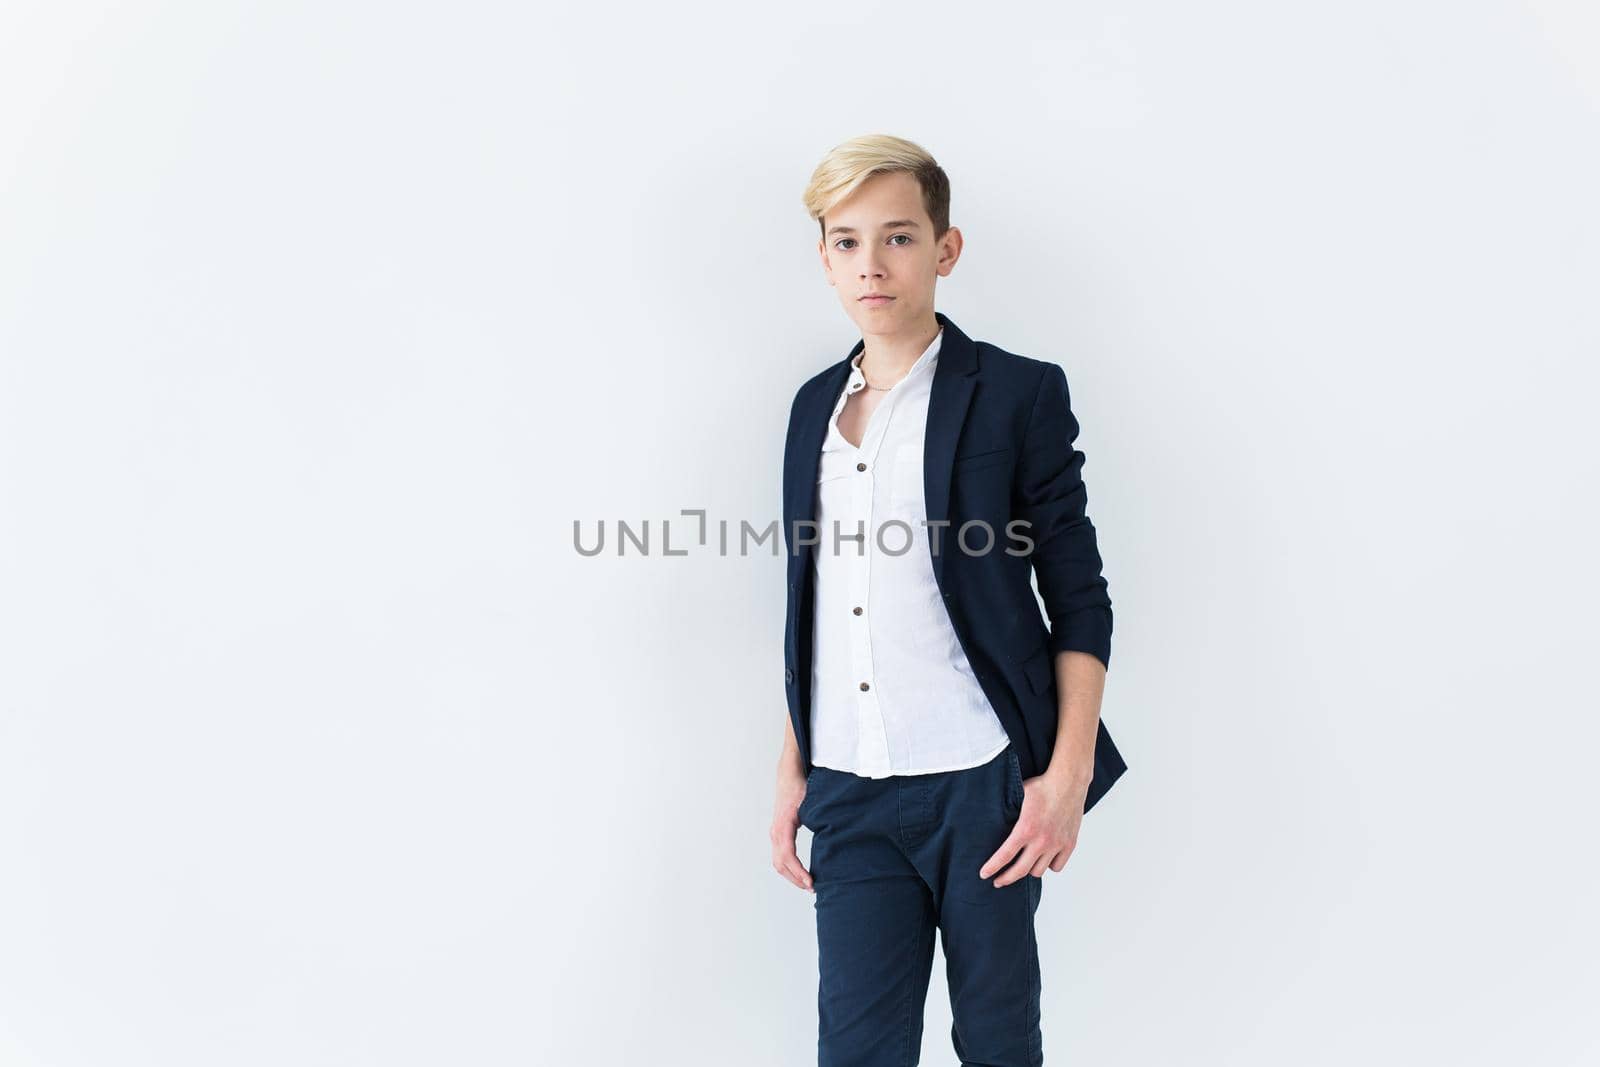 Puberty concept - Teenage boy portrait on a white background with copyspace. by Satura86